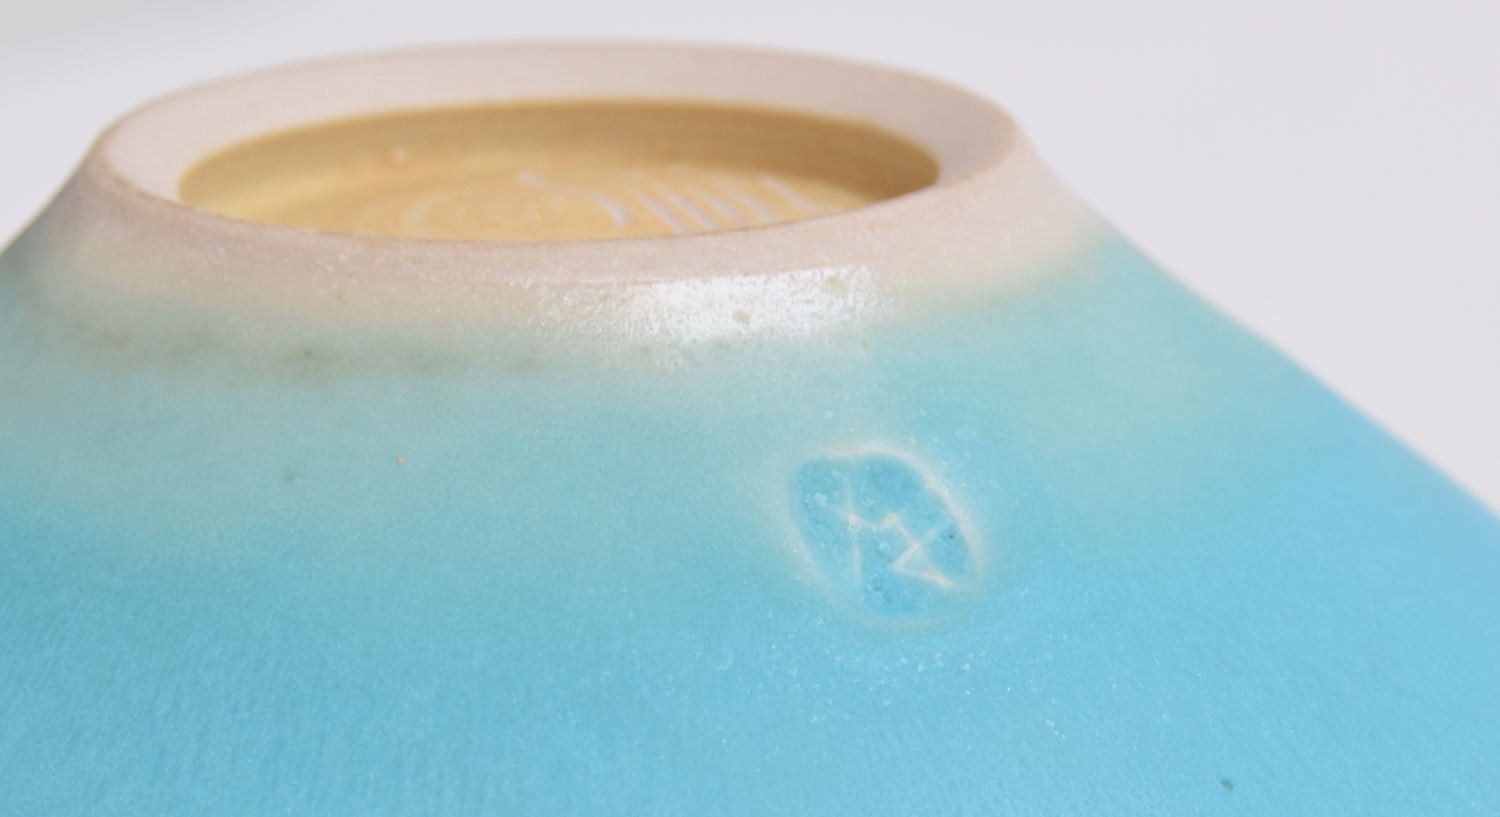 Peter Wills (b.1955), a studio pottery bowl, pale blue with rim drips, signed Wills & PW, 11cm high, - Image 3 of 6